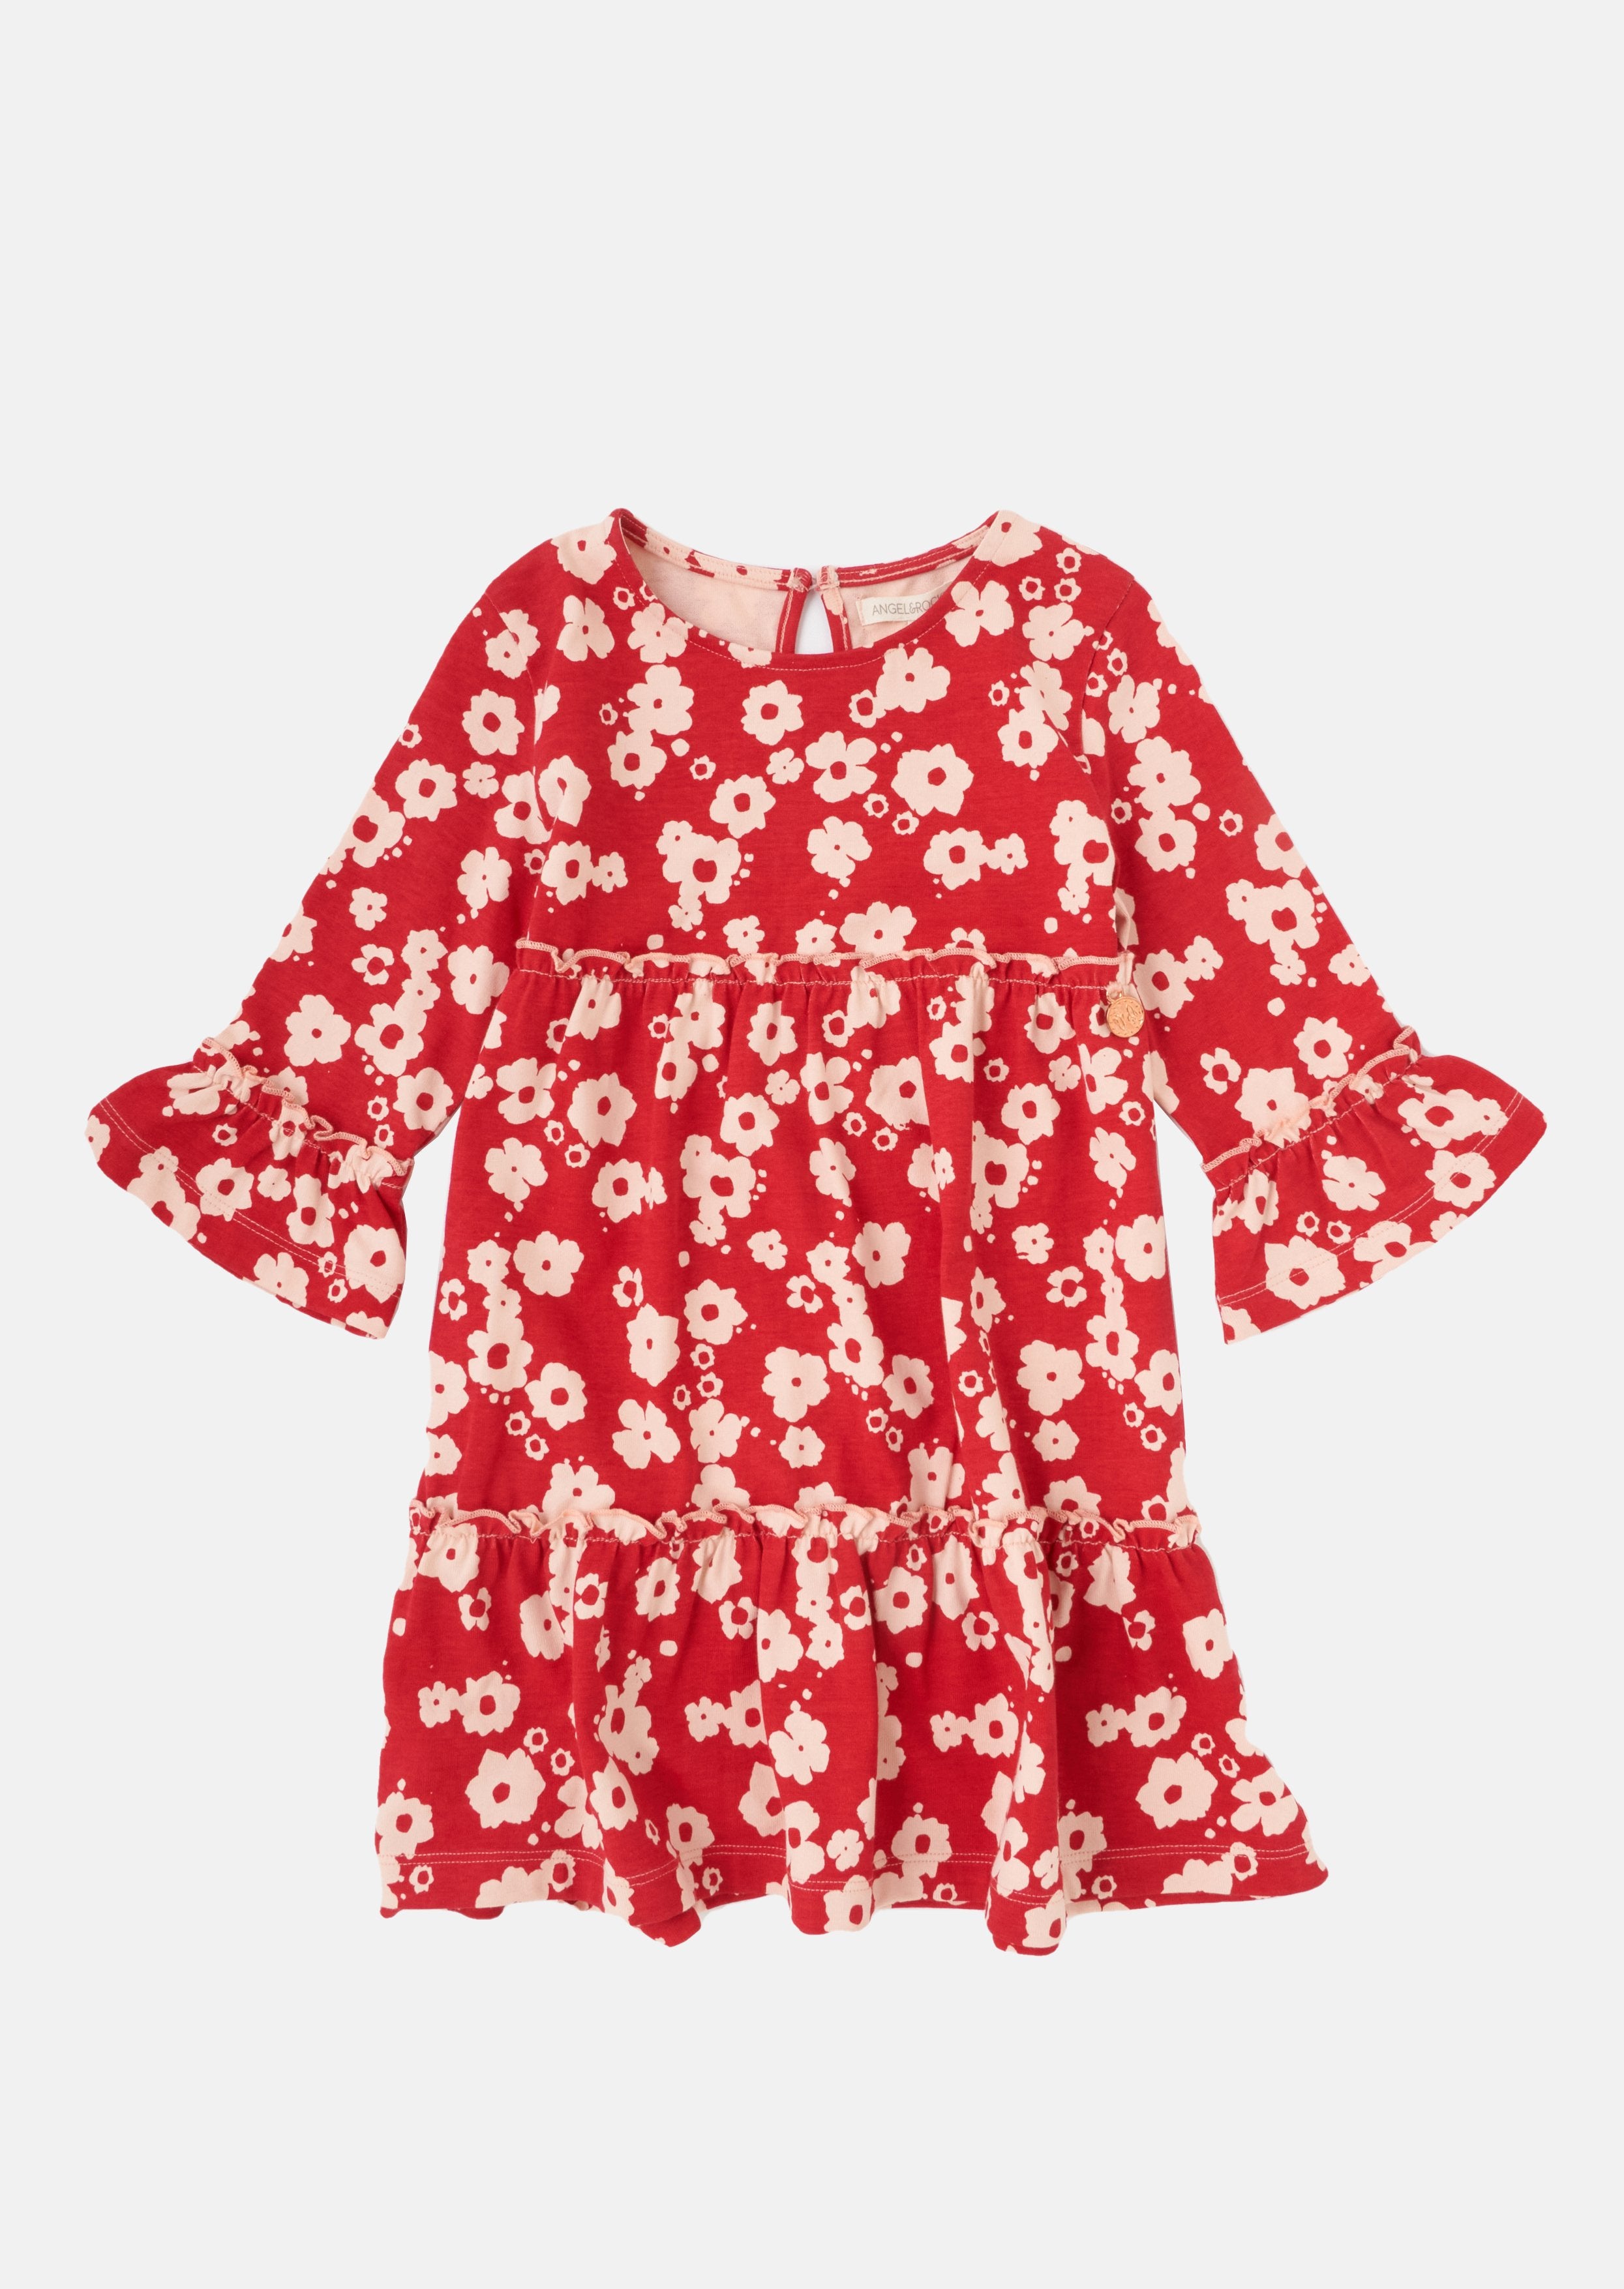 Girls Floral Printed Cotton Red Dress